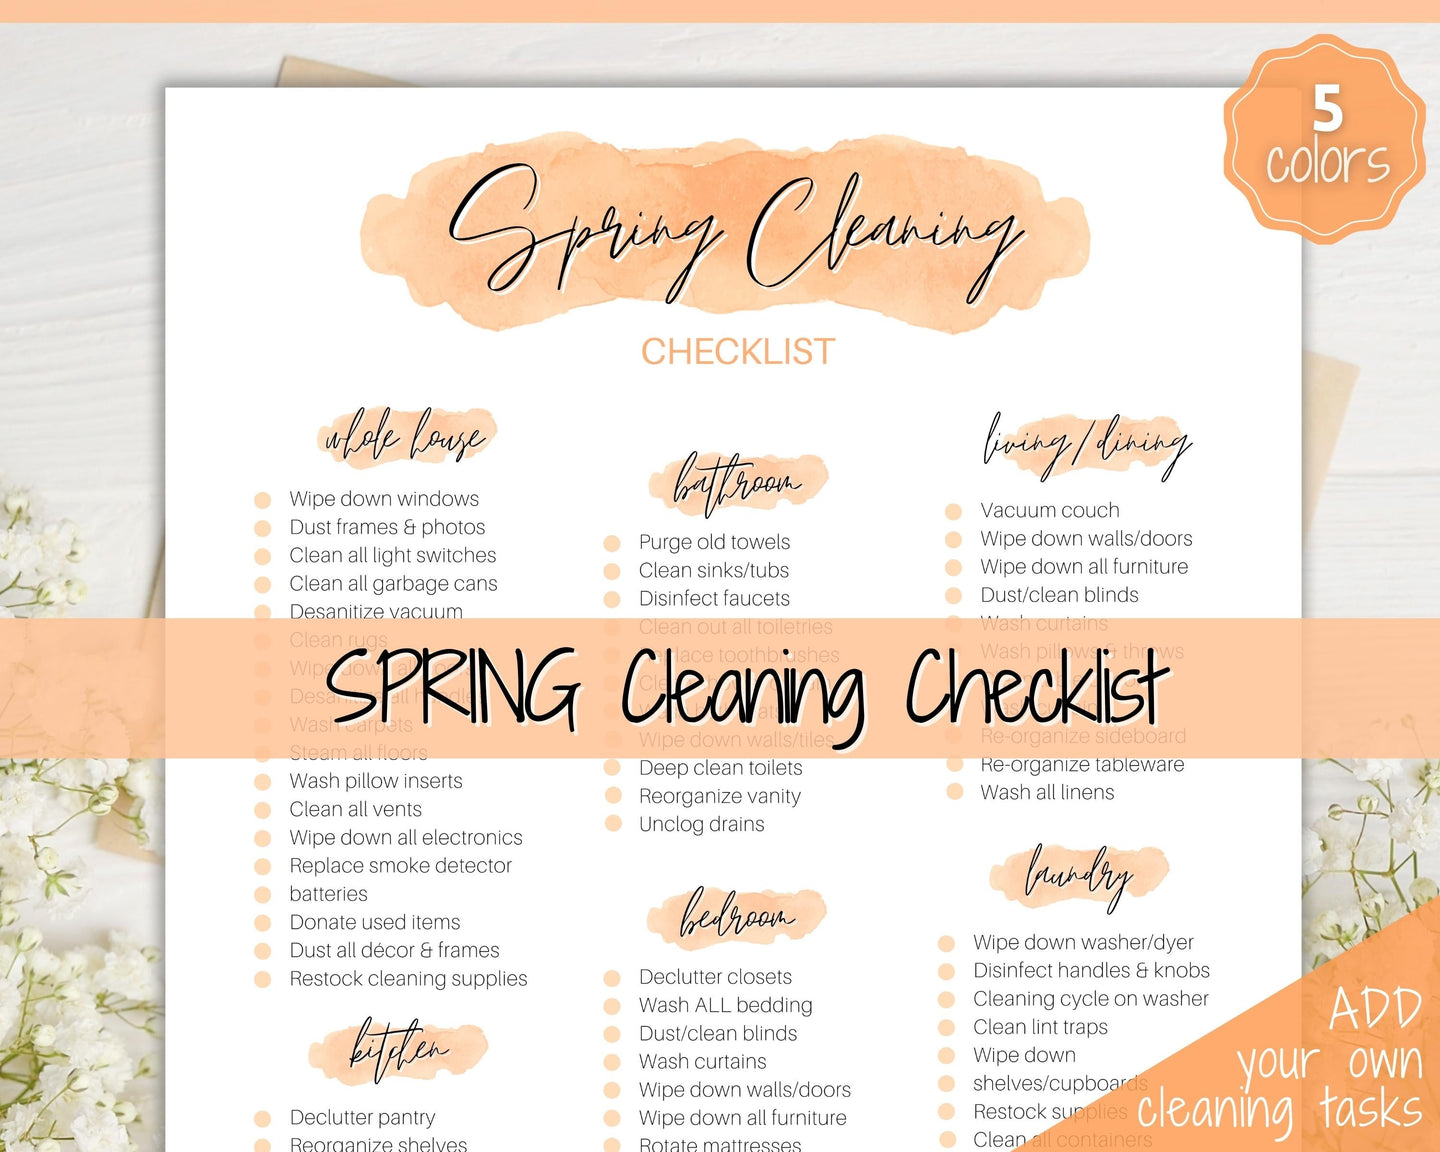 Spring Cleaning Checklist, Cleaning Schedule, Printable Cleaning Planner, Editable House Cleaning List, Deep Clean Home Routine Housekeeping | Orange